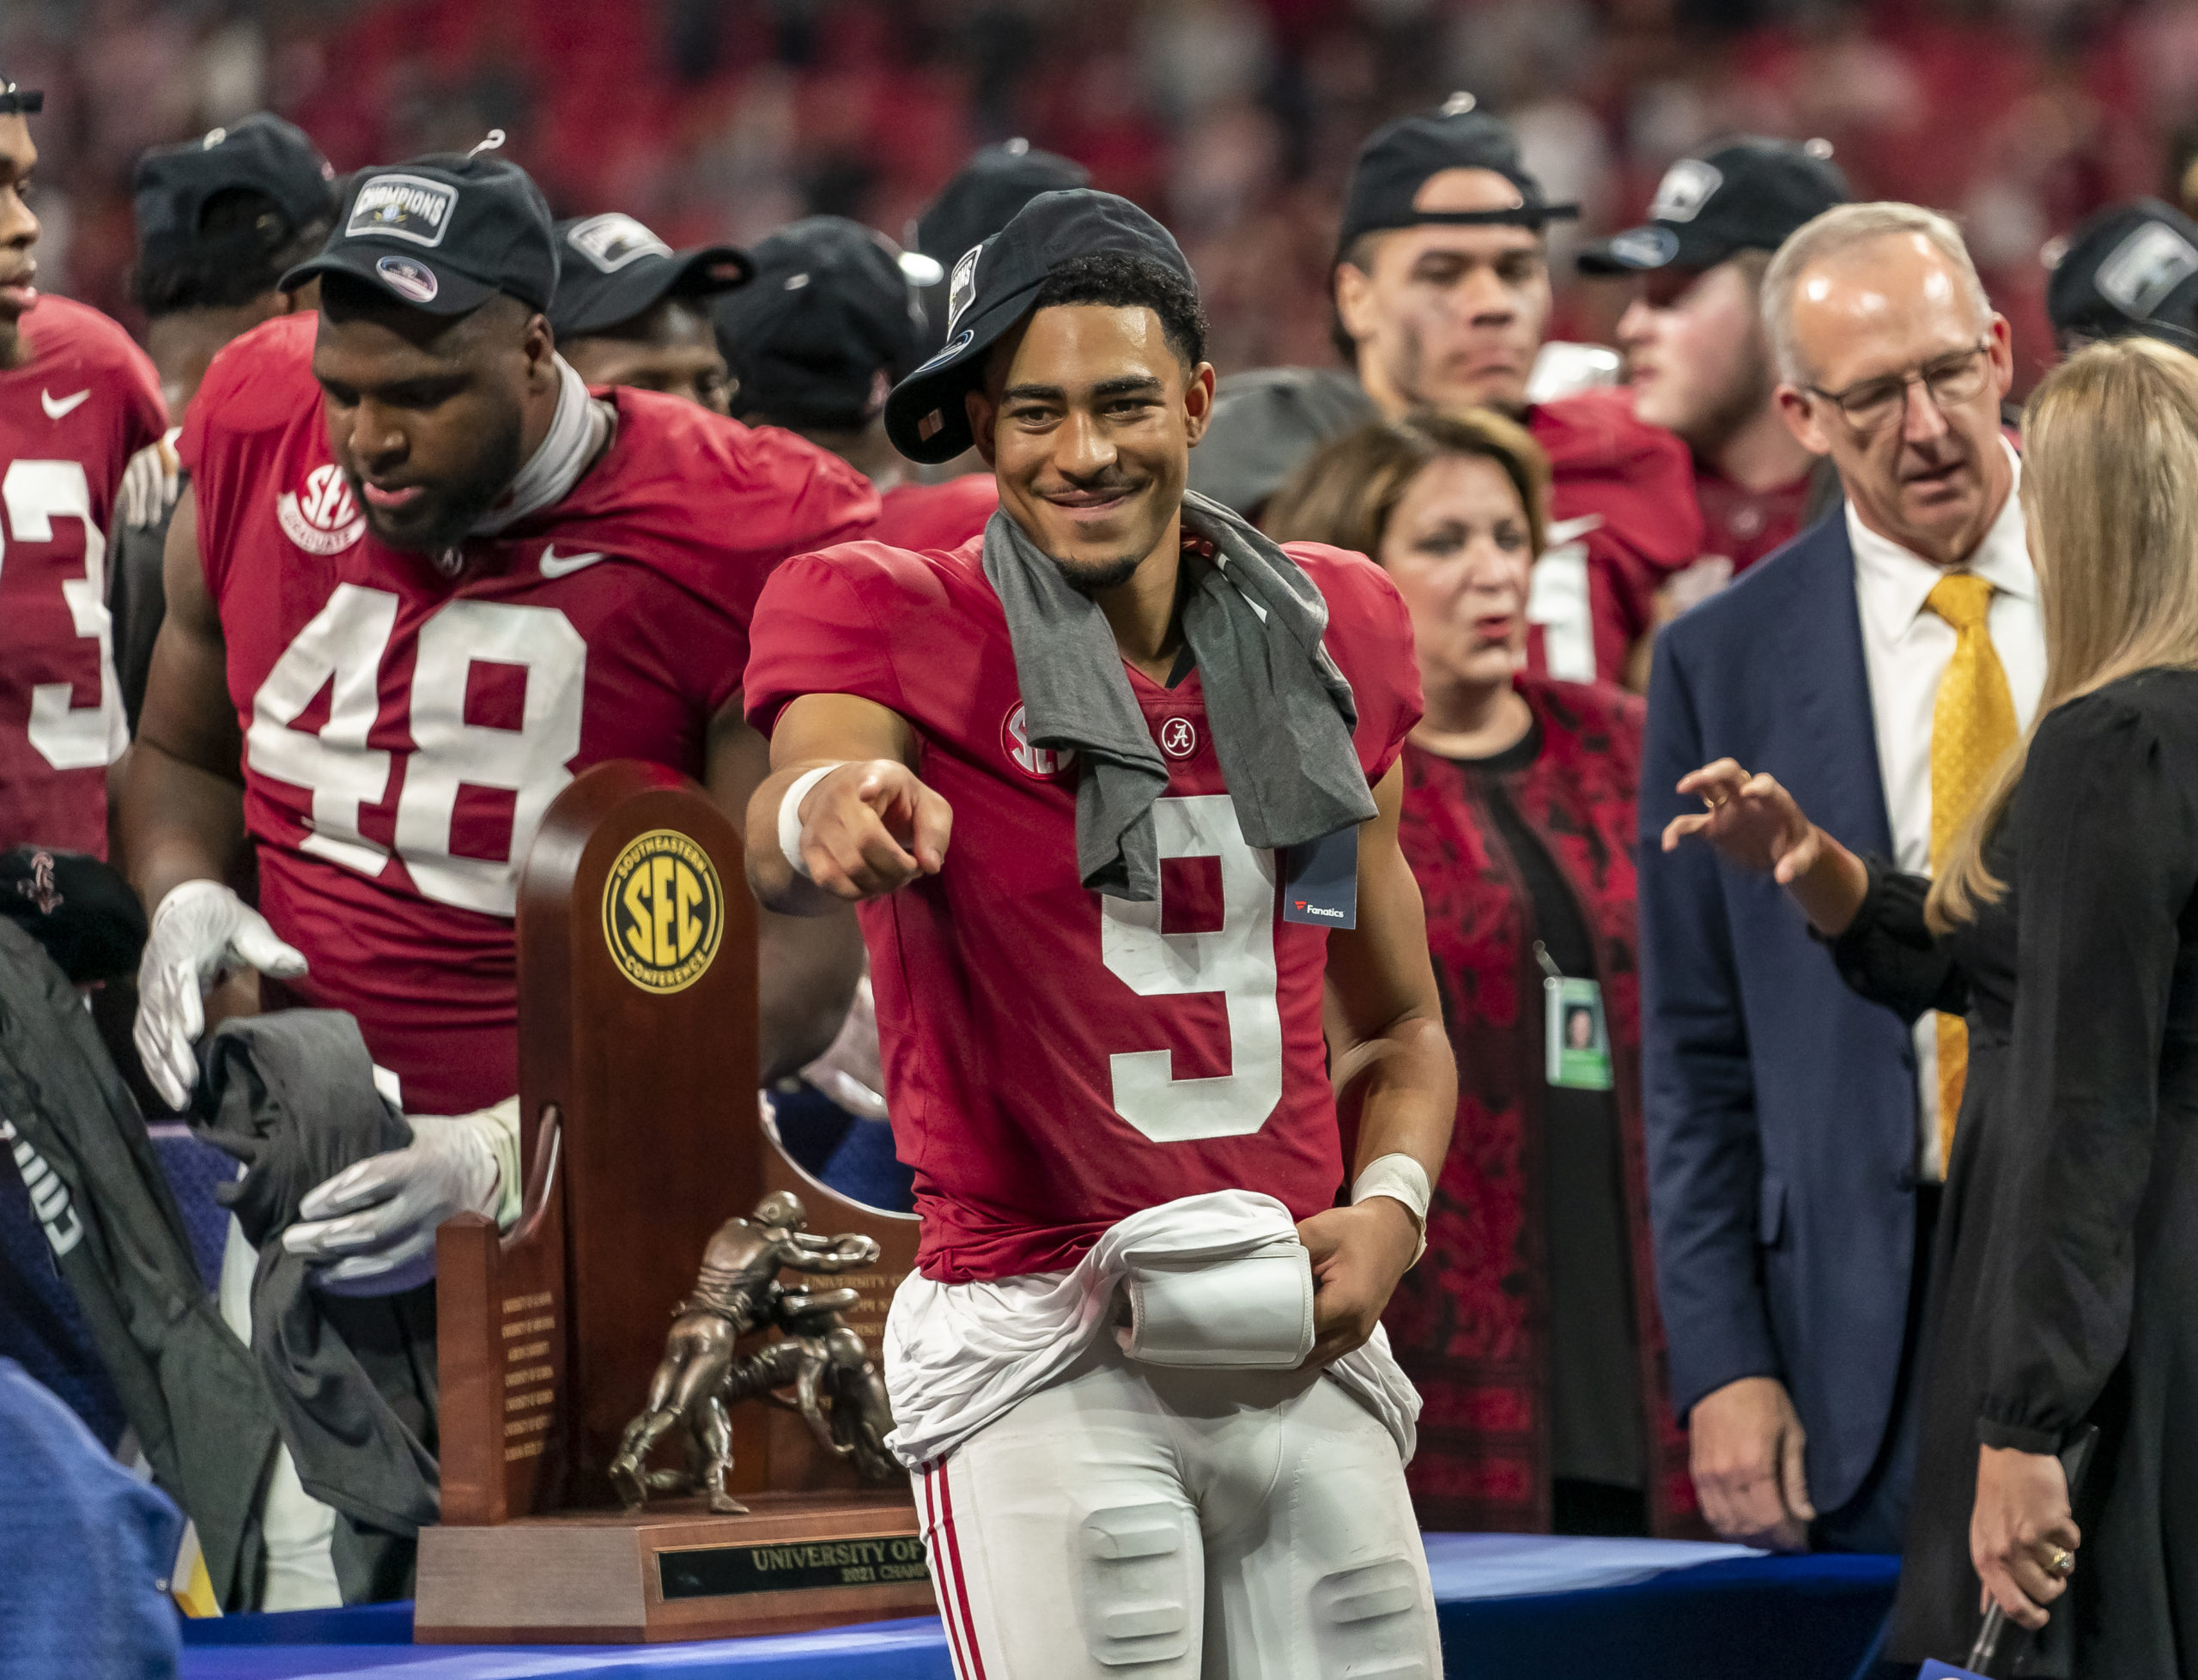 ATLANTA, GA - DECEMBER 4: Bryce Young #9 of the Alabama Crimson Tide celebrates winning the SEC Championship during a game between Georgia Bulldogs and Alabama Crimson Tide at Mercedes-Benz Stadium on December 4, 2021 in Atlanta, Georgia. (Photo by Steven Limentani/ISI Photos/Getty Images)